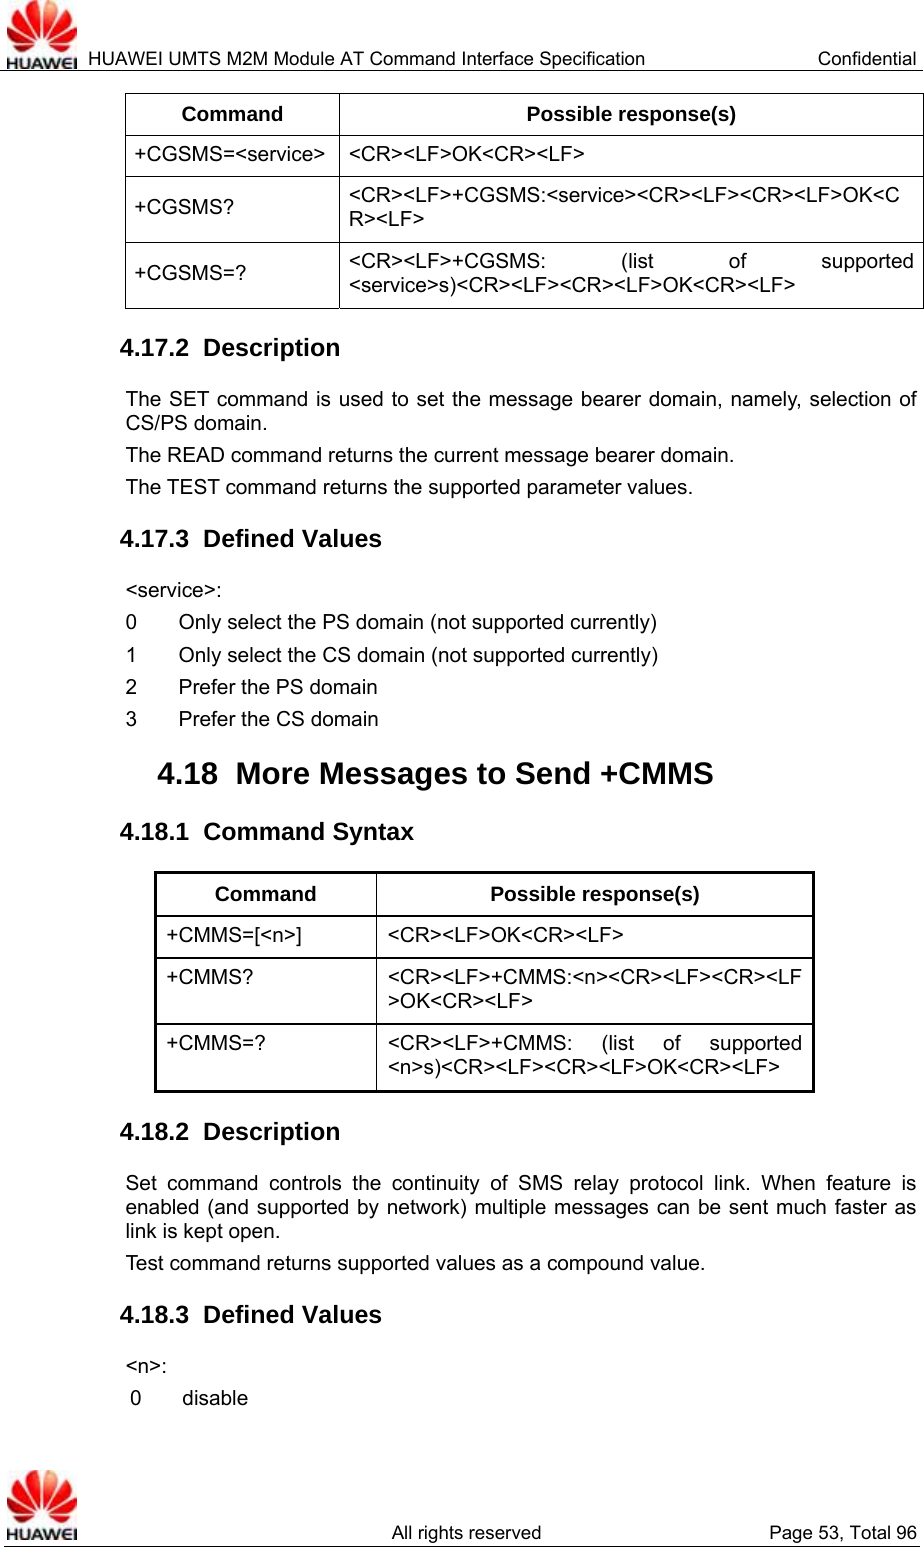  HUAWEI UMTS M2M Module AT Command Interface Specification  Confidential   All rights reserved  Page 53, Total 96 Command Possible response(s) +CGSMS=&lt;service&gt; &lt;CR&gt;&lt;LF&gt;OK&lt;CR&gt;&lt;LF&gt; +CGSMS?  &lt;CR&gt;&lt;LF&gt;+CGSMS:&lt;service&gt;&lt;CR&gt;&lt;LF&gt;&lt;CR&gt;&lt;LF&gt;OK&lt;CR&gt;&lt;LF&gt; +CGSMS=?  &lt;CR&gt;&lt;LF&gt;+CGSMS: (list of supported &lt;service&gt;s)&lt;CR&gt;&lt;LF&gt;&lt;CR&gt;&lt;LF&gt;OK&lt;CR&gt;&lt;LF&gt; 4.17.2  Description The SET command is used to set the message bearer domain, namely, selection of CS/PS domain.   The READ command returns the current message bearer domain.   The TEST command returns the supported parameter values.   4.17.3  Defined Values &lt;service&gt;:  0        Only select the PS domain (not supported currently)   1        Only select the CS domain (not supported currently)   2    Prefer the PS domain 3    Prefer the CS domain 4.18  More Messages to Send +CMMS   4.18.1  Command Syntax Command Possible response(s) +CMMS=[&lt;n&gt;] &lt;CR&gt;&lt;LF&gt;OK&lt;CR&gt;&lt;LF&gt; +CMMS?  &lt;CR&gt;&lt;LF&gt;+CMMS:&lt;n&gt;&lt;CR&gt;&lt;LF&gt;&lt;CR&gt;&lt;LF&gt;OK&lt;CR&gt;&lt;LF&gt; +CMMS=?  &lt;CR&gt;&lt;LF&gt;+CMMS: (list of supported &lt;n&gt;s)&lt;CR&gt;&lt;LF&gt;&lt;CR&gt;&lt;LF&gt;OK&lt;CR&gt;&lt;LF&gt; 4.18.2  Description Set command controls the continuity of SMS relay protocol link. When feature is enabled (and supported by network) multiple messages can be sent much faster as link is kept open. Test command returns supported values as a compound value. 4.18.3  Defined Values &lt;n&gt;: 0  disable 